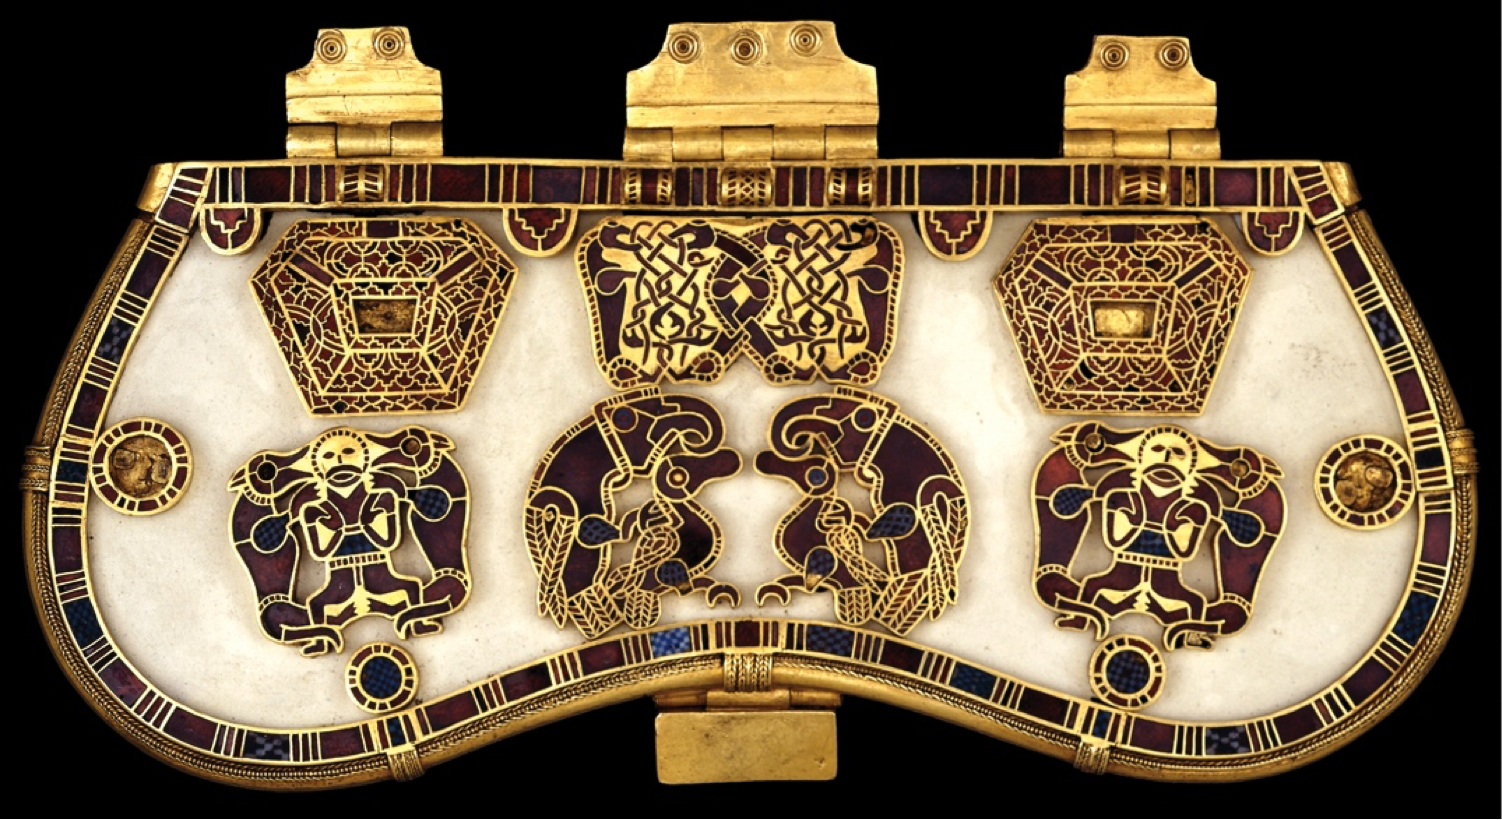 Purse Cover from Sutton Hoo